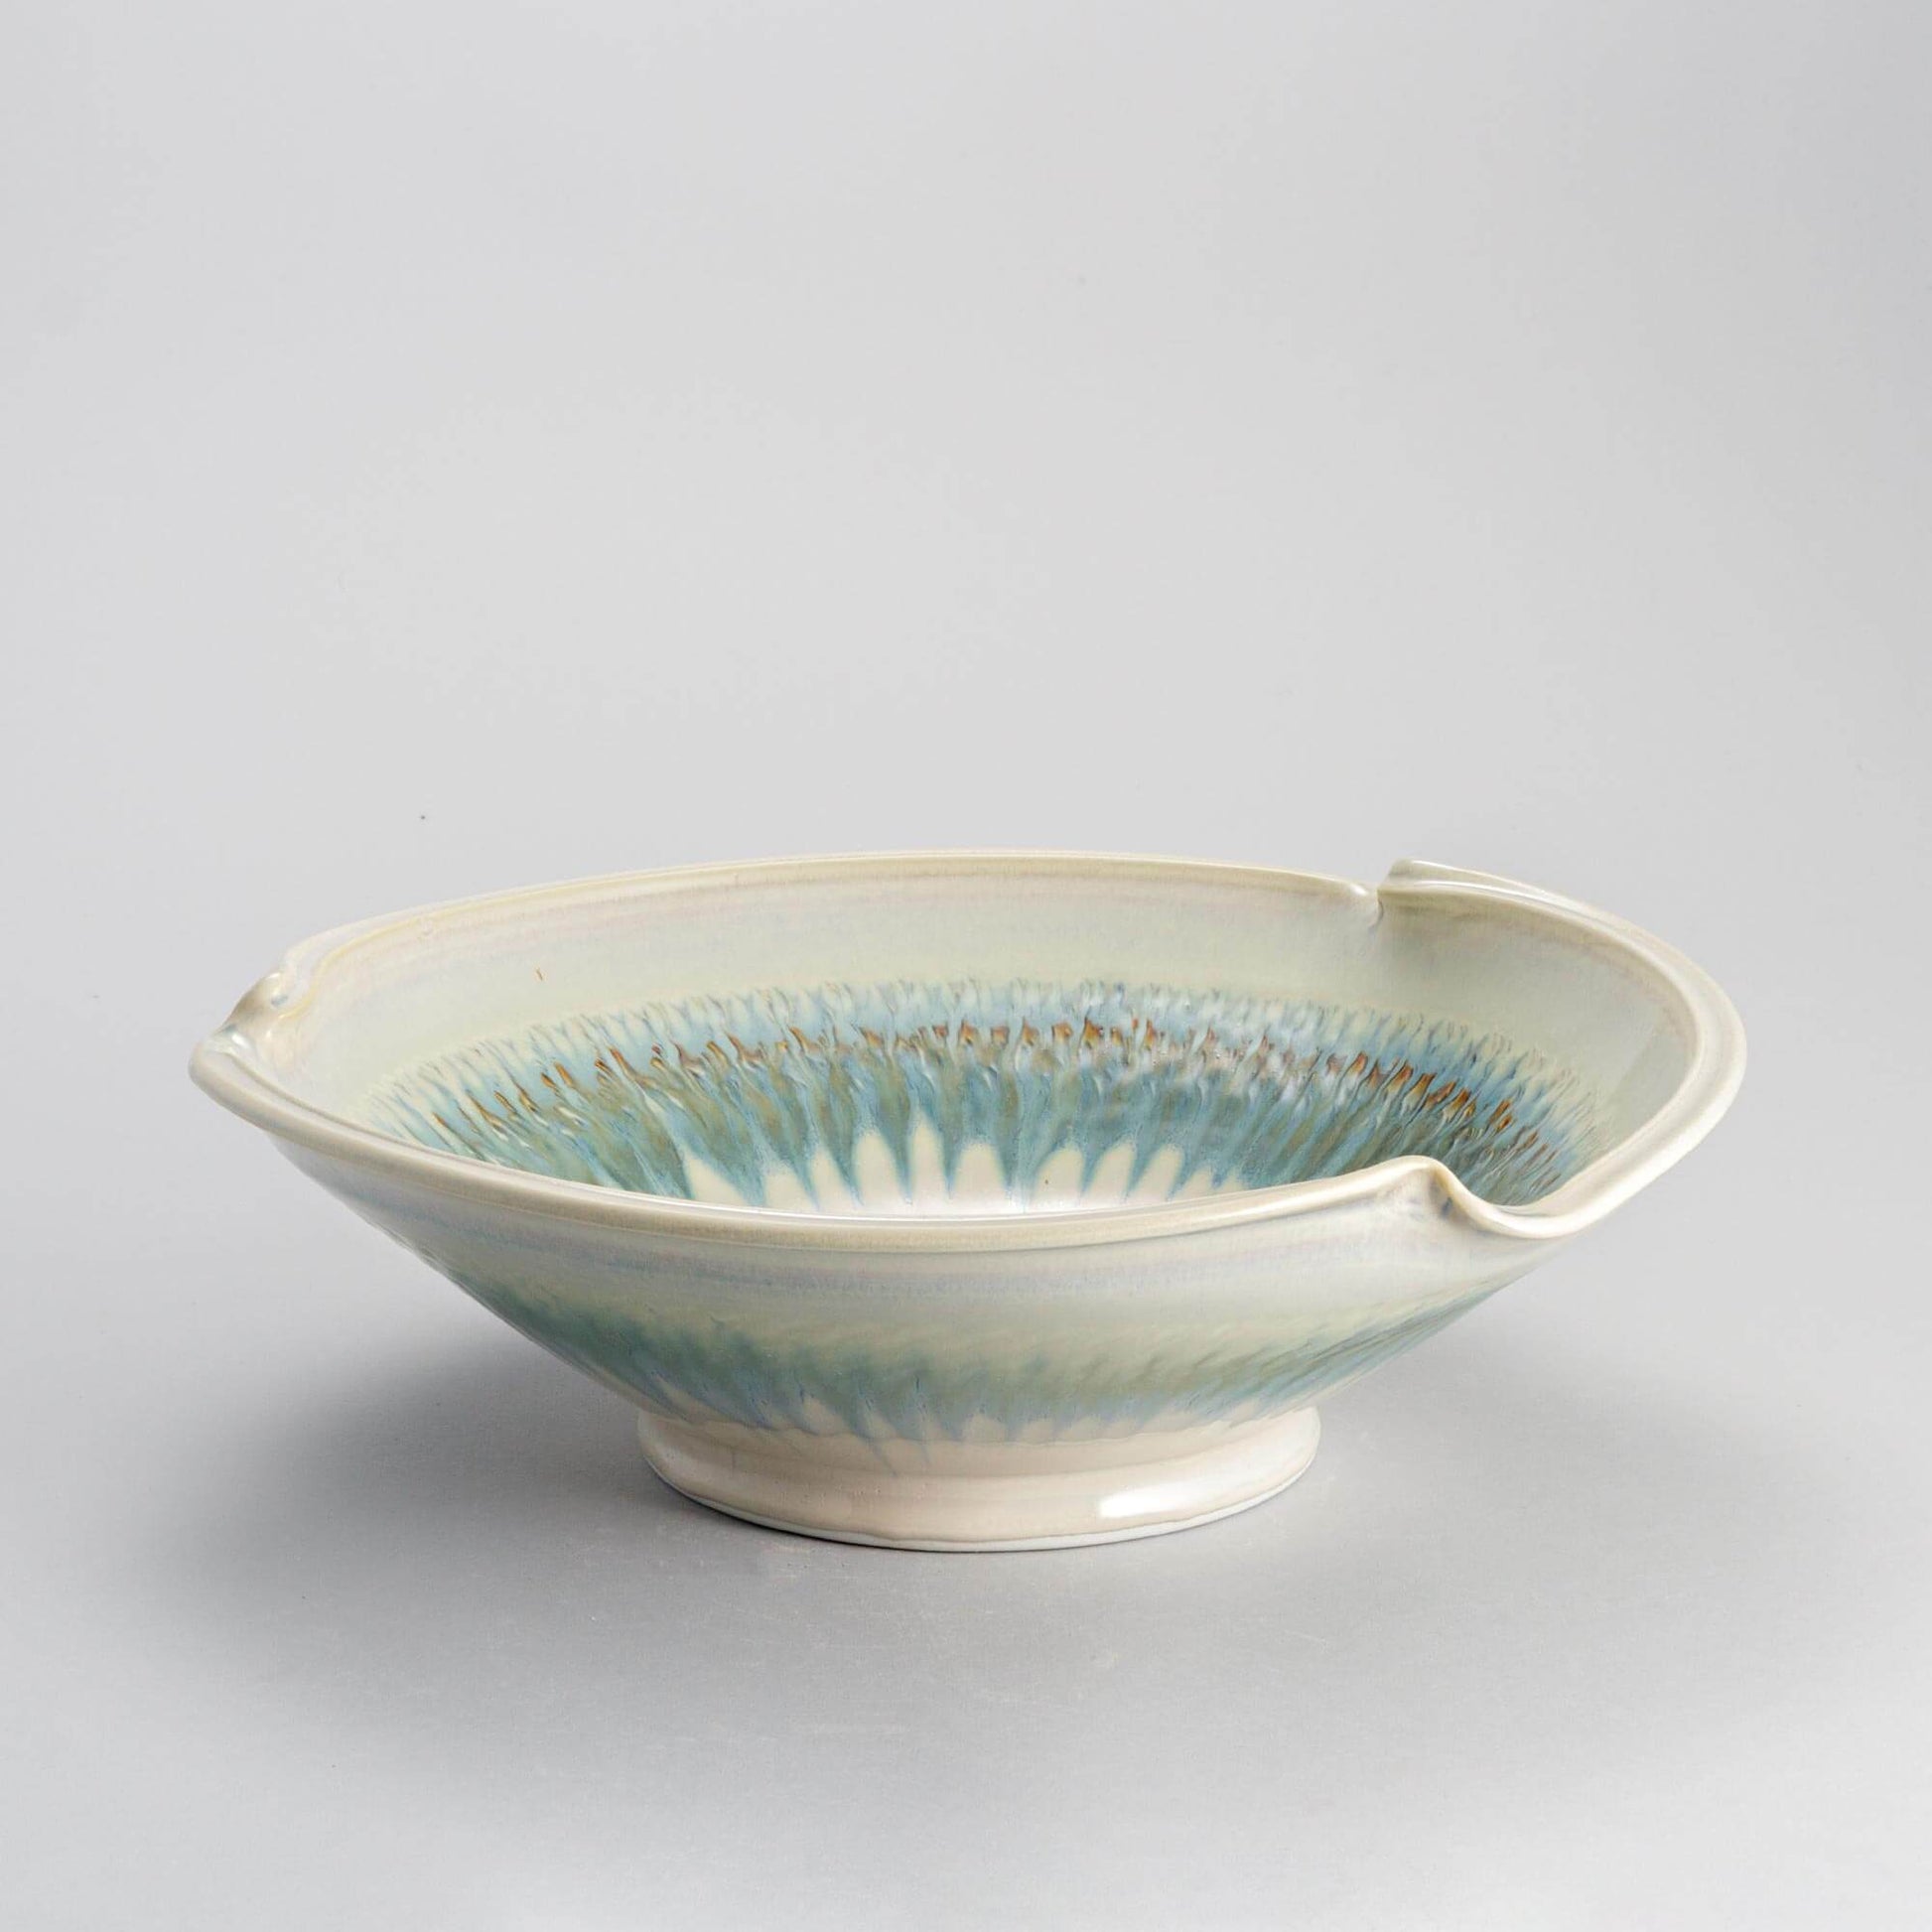 Handmade Pottery Signature Wave Bowl  made by Georgetown Pottery in Maine